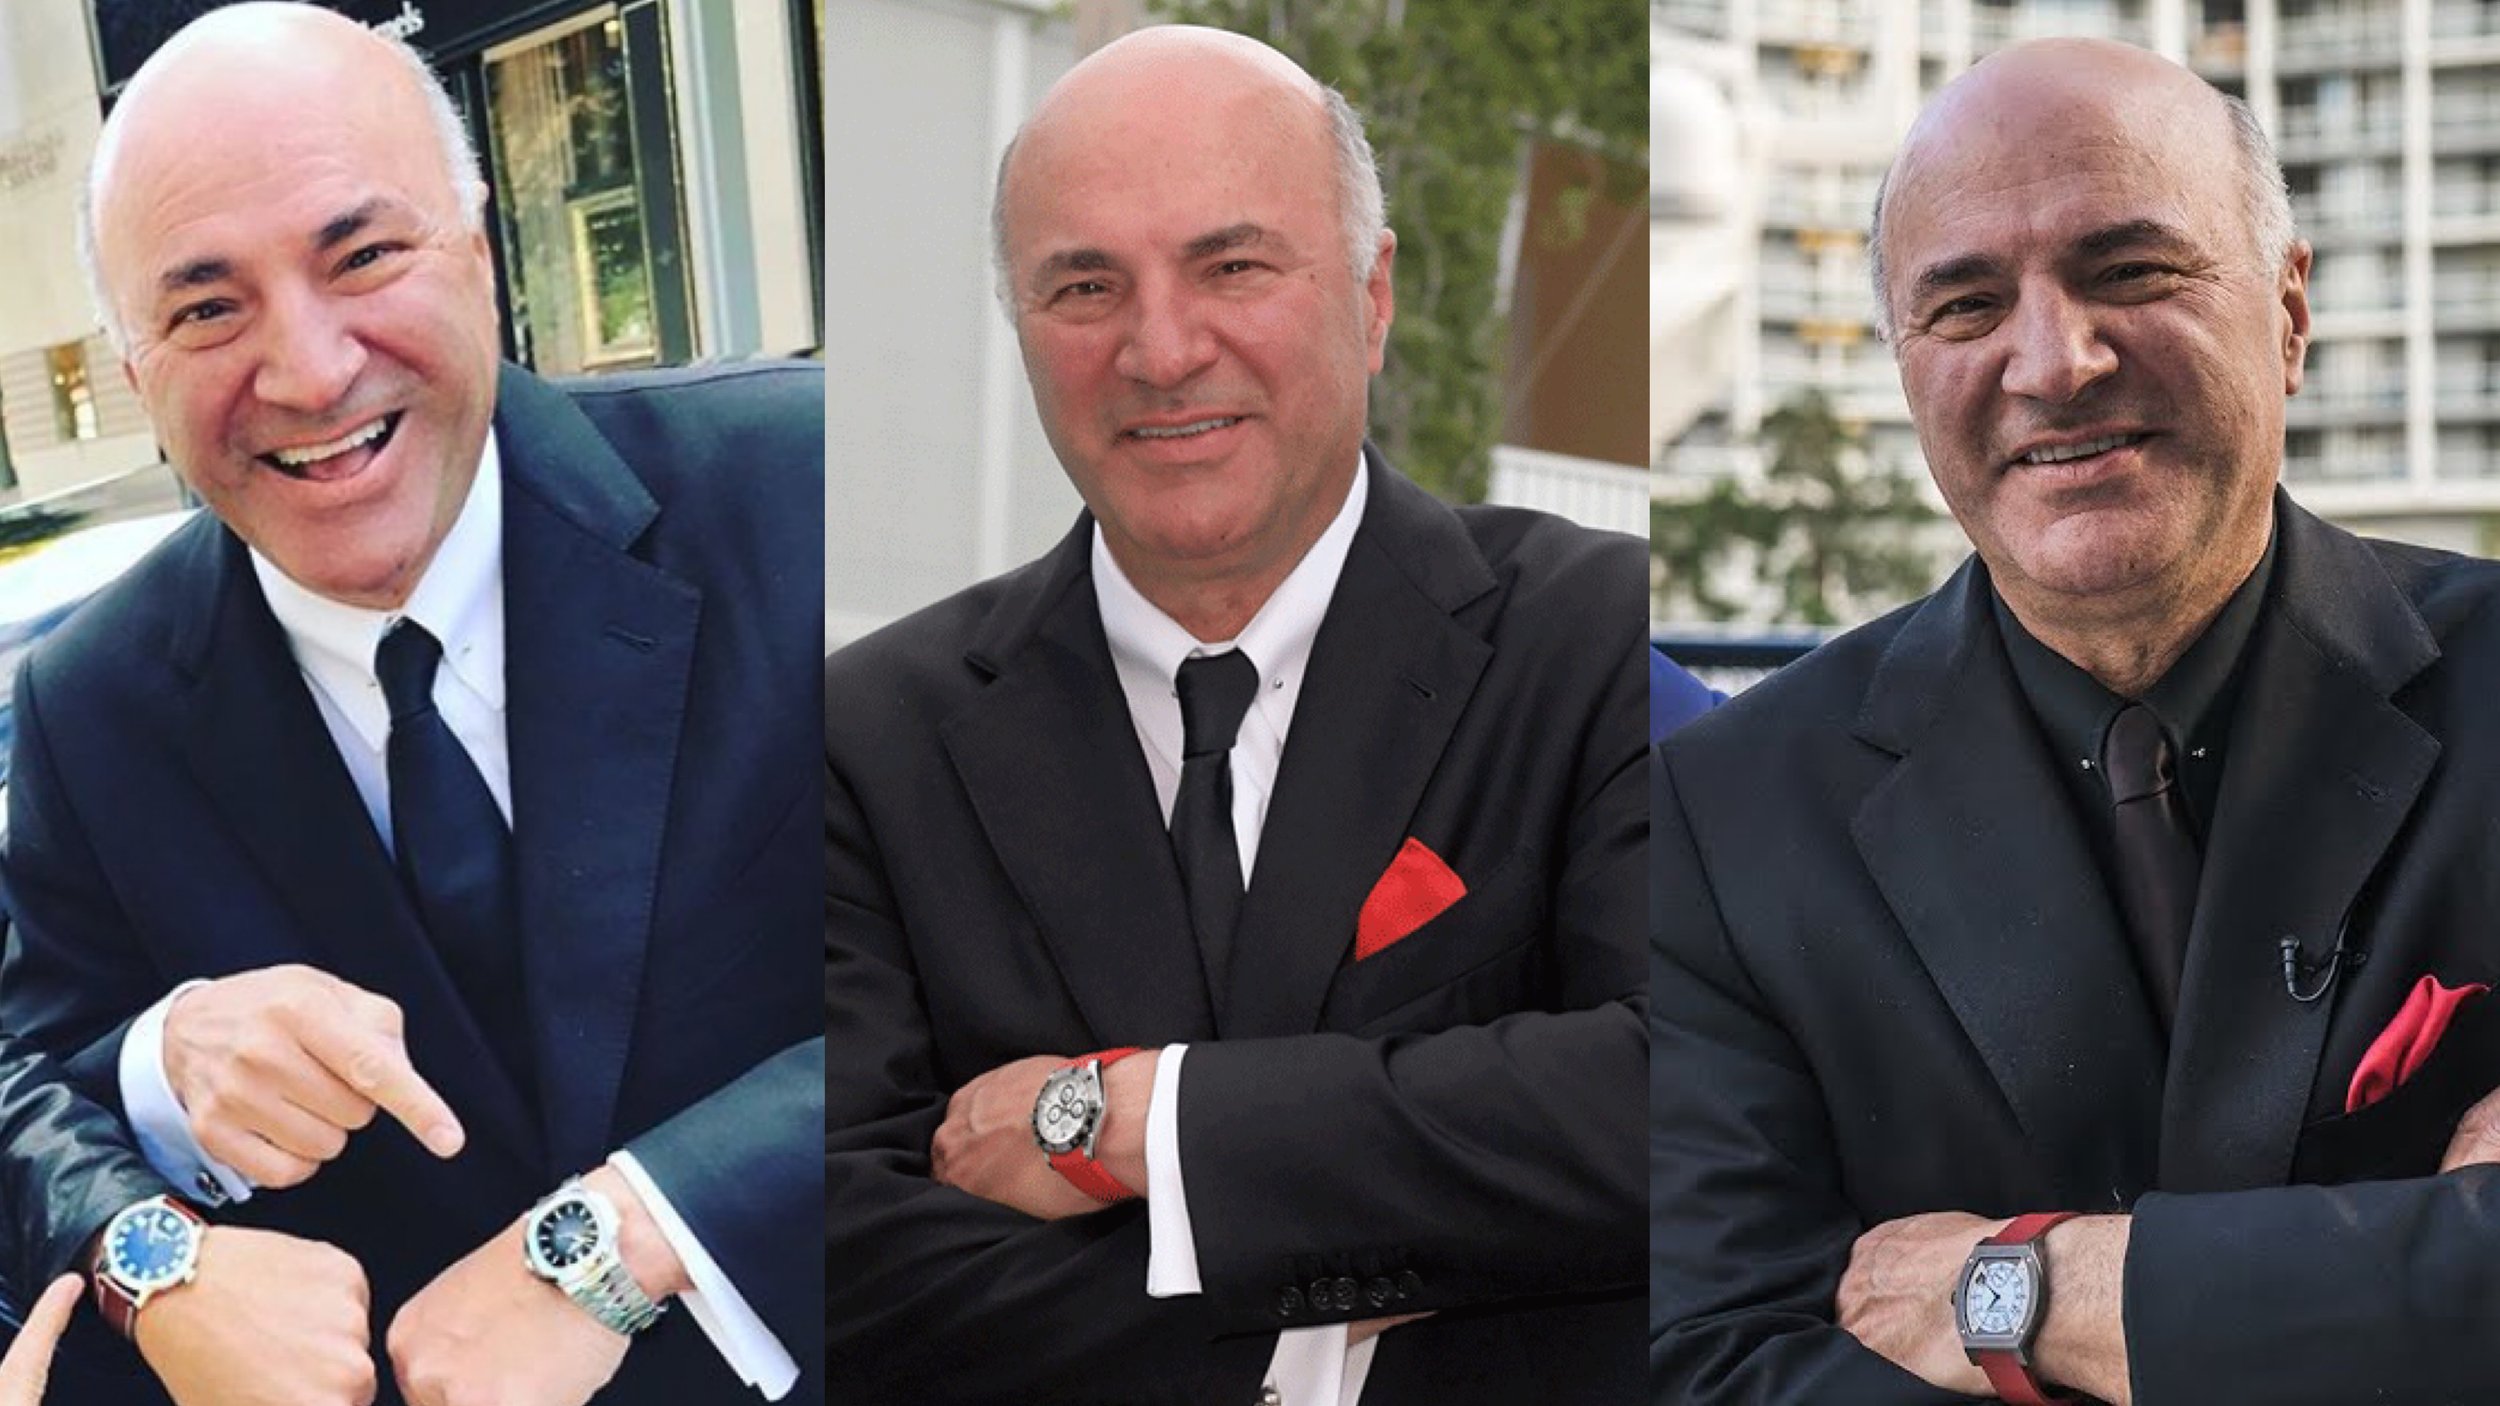 Kevin O'Leary's Watches - What is in the Shark Tank Star's Watch  Collection? — Wrist Enthusiast